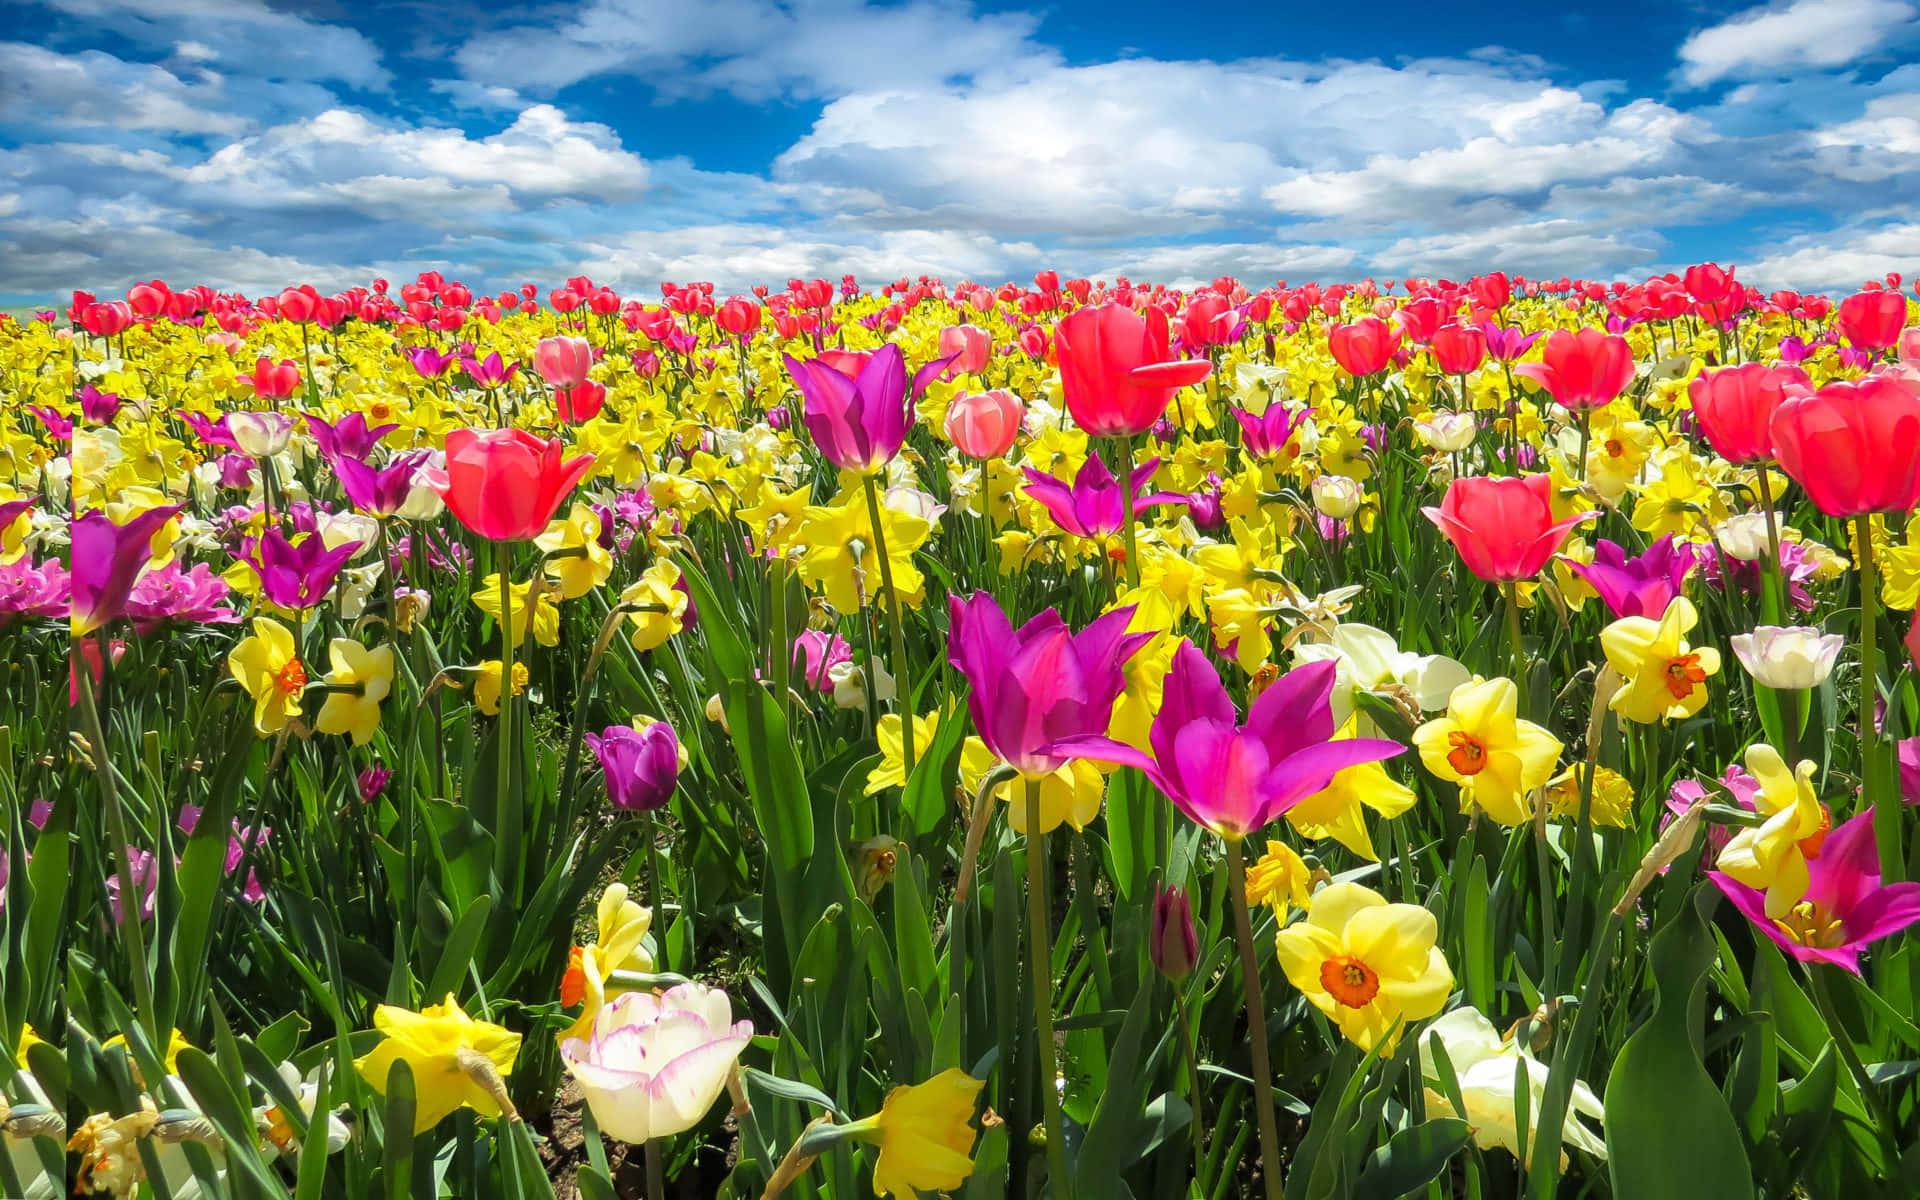 A beautiful view of Spring flowers